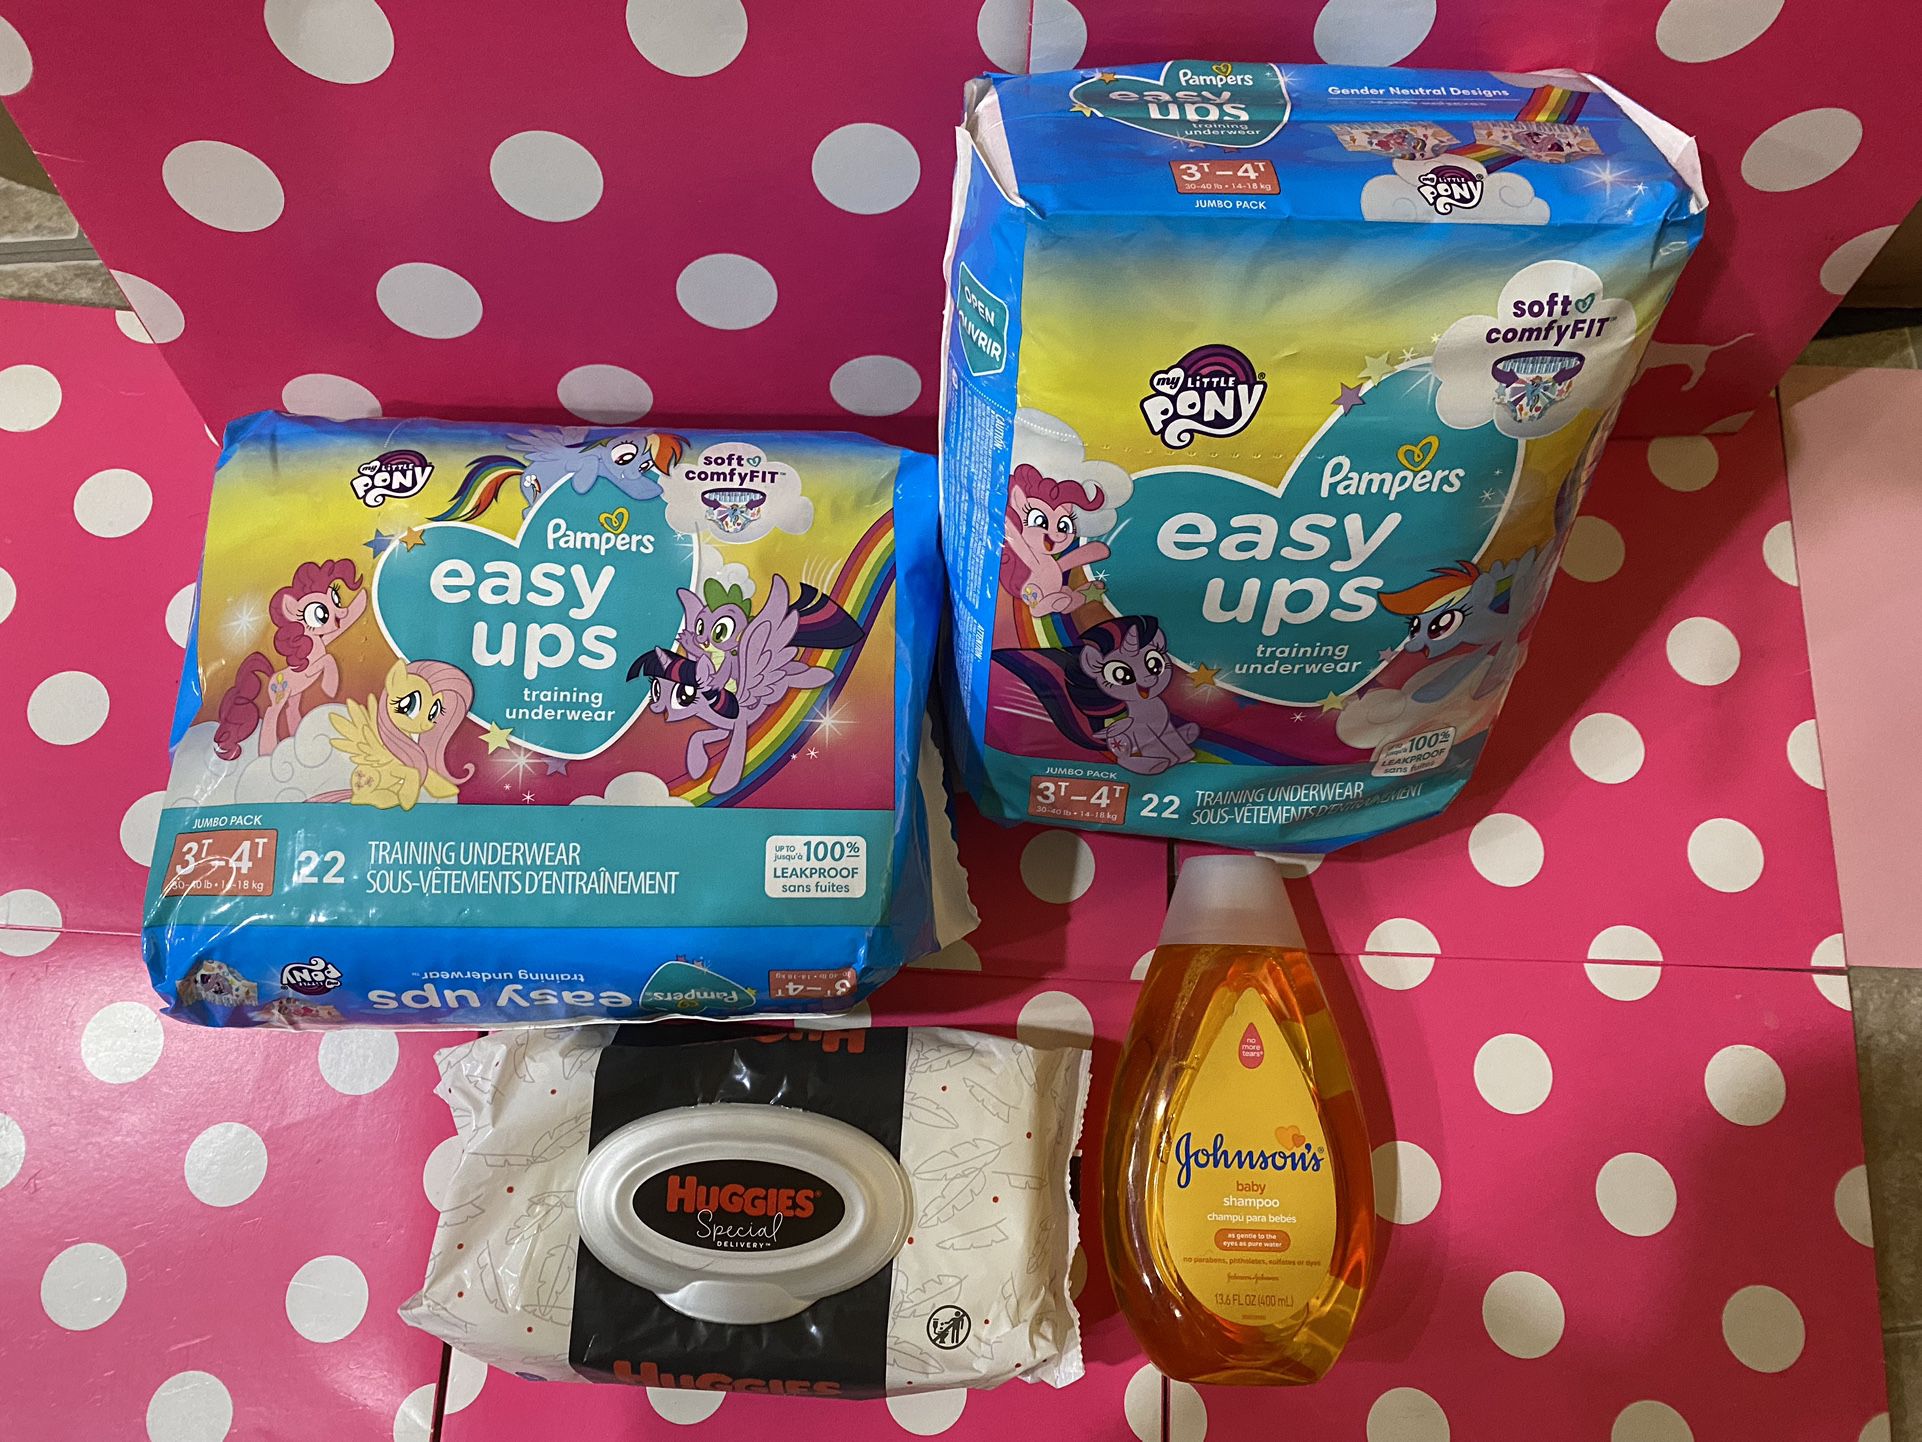 PAMPERS EASY UPS!